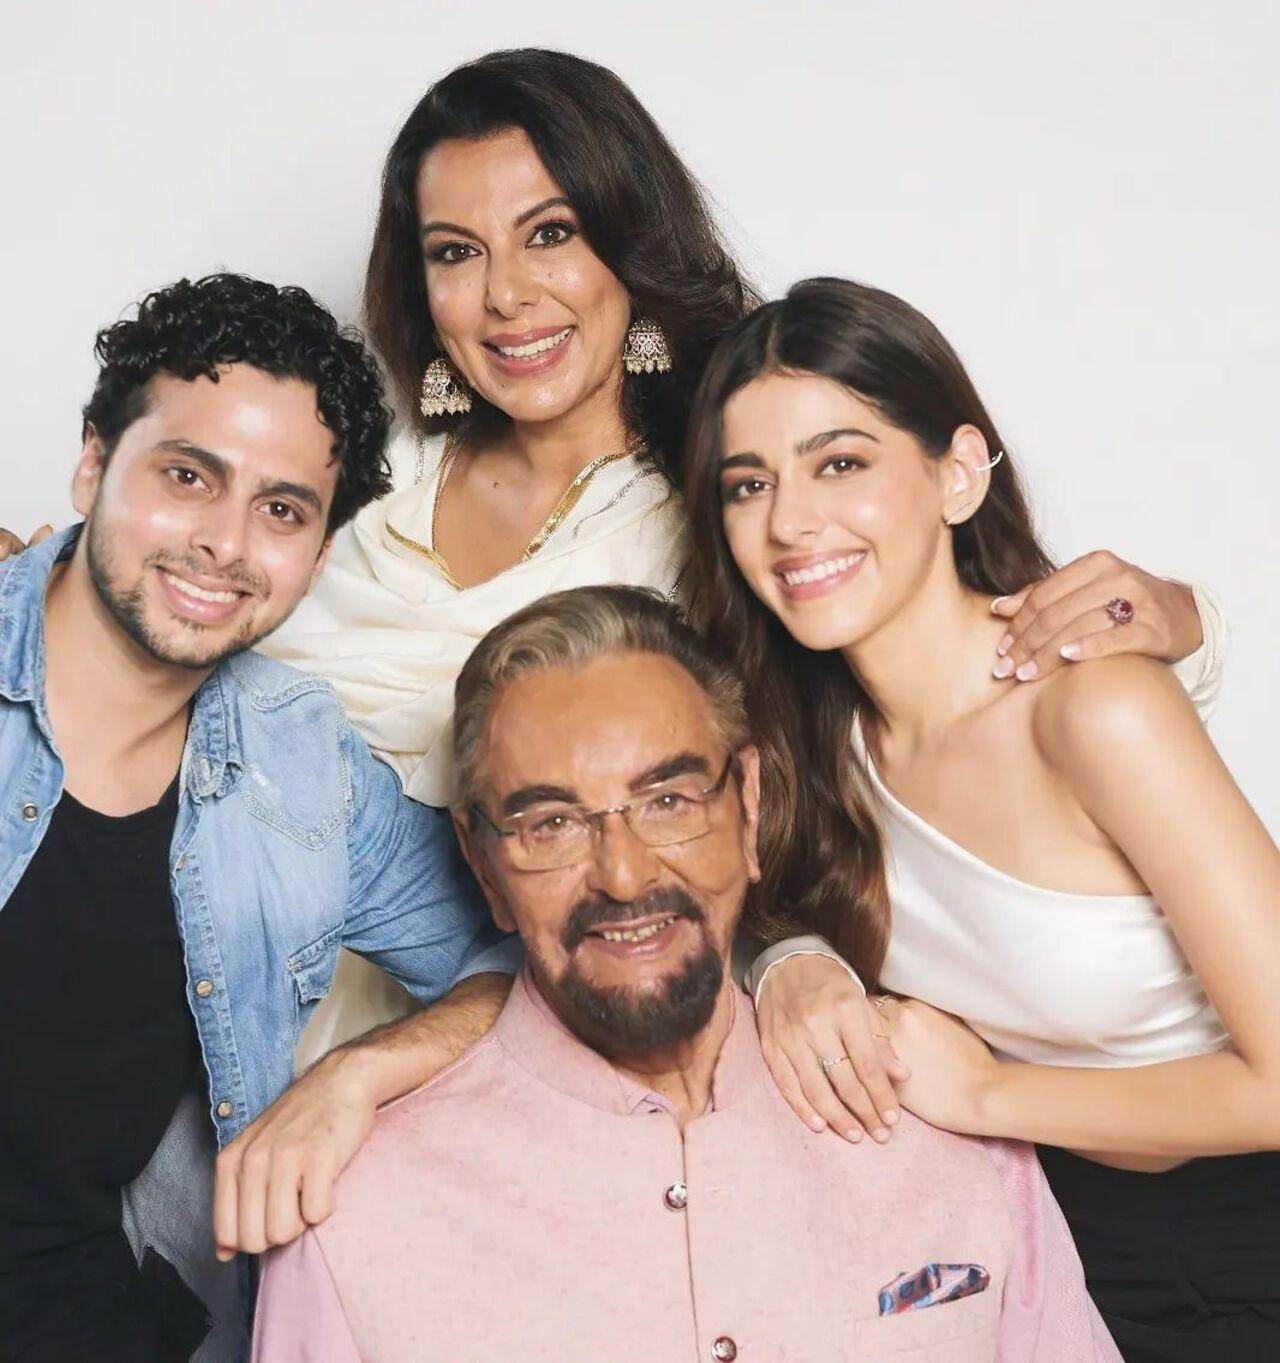 Veteran actor Kabir Bedi's daughter Pooja Bedi wed businessman Farhan Furniturewalla in 1990. They divorced in 2003 after thirteen years of marriage and Pooja became a single mom to daughter Alaya F, now a renowned actress, and son Omar. 